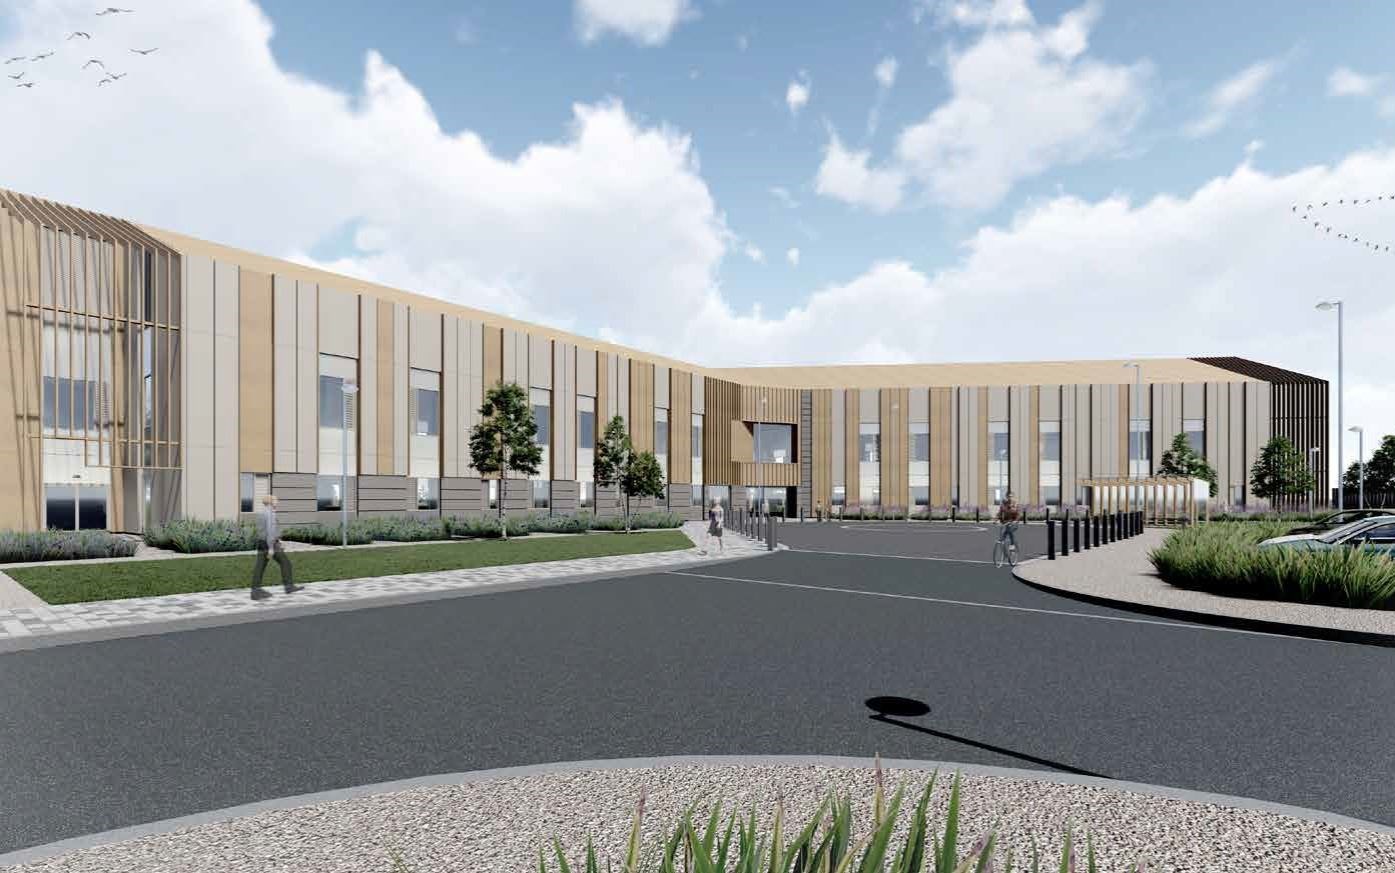 An artist's impression how the completed centre will look.